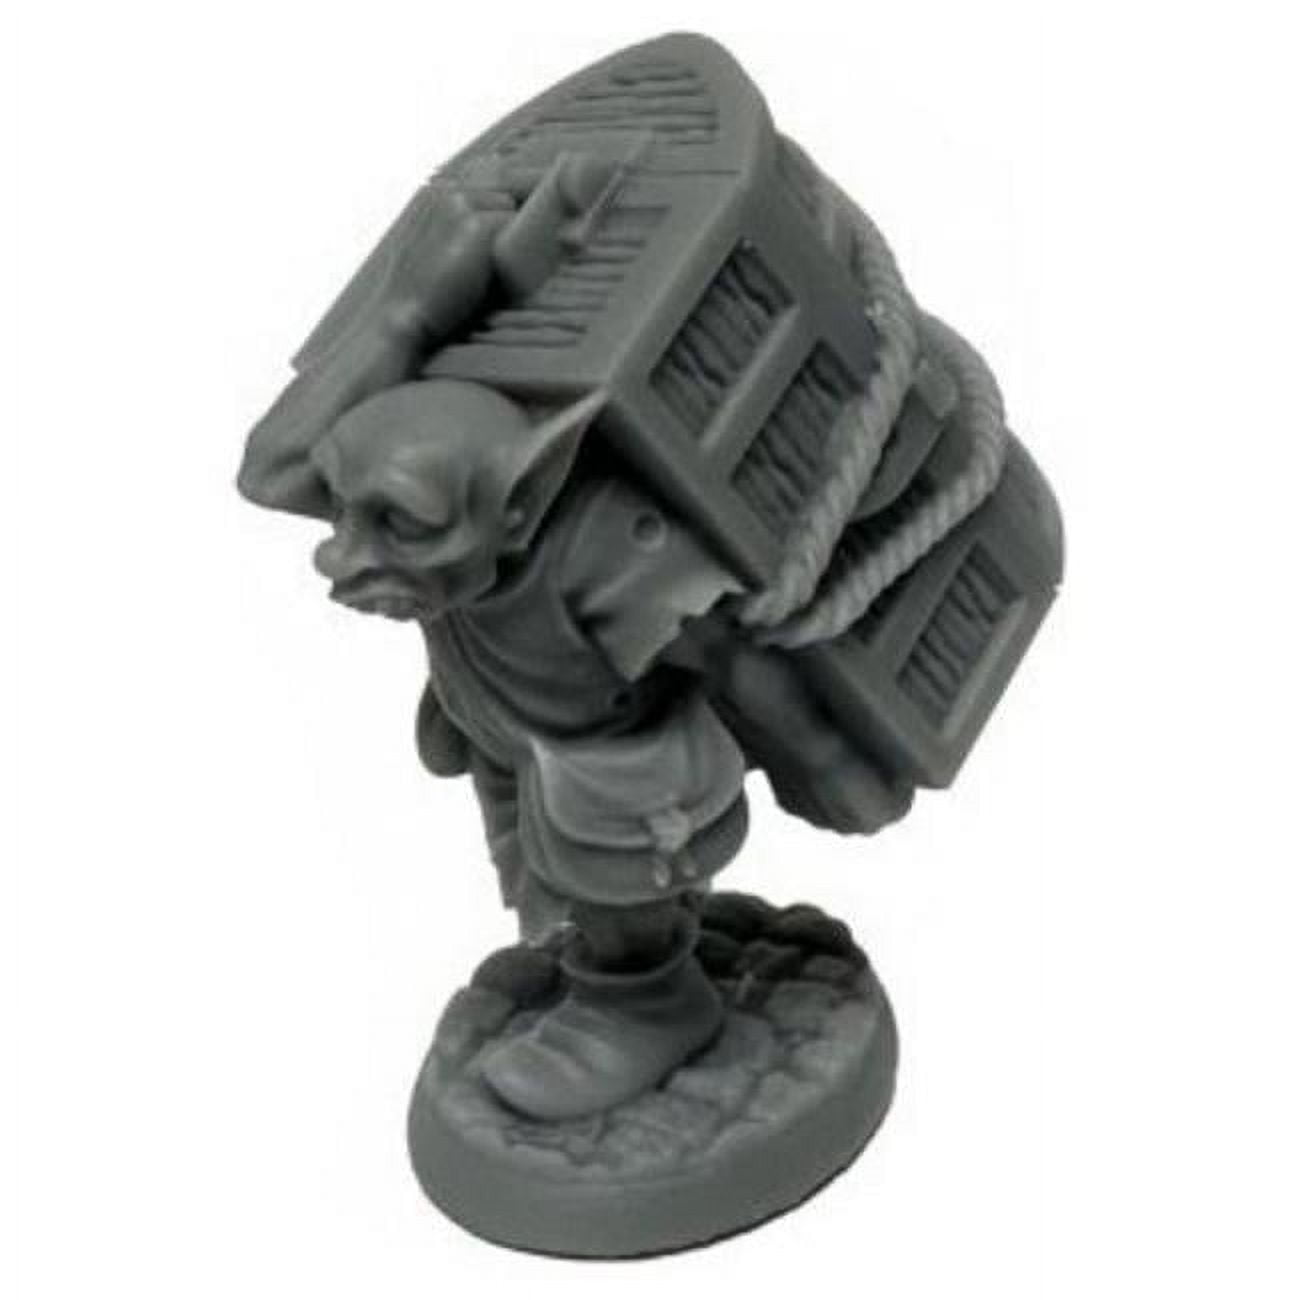 Picture of Reaper Miniatures REM07072 Dungeons & Dragons Goblin Henchman Miniature